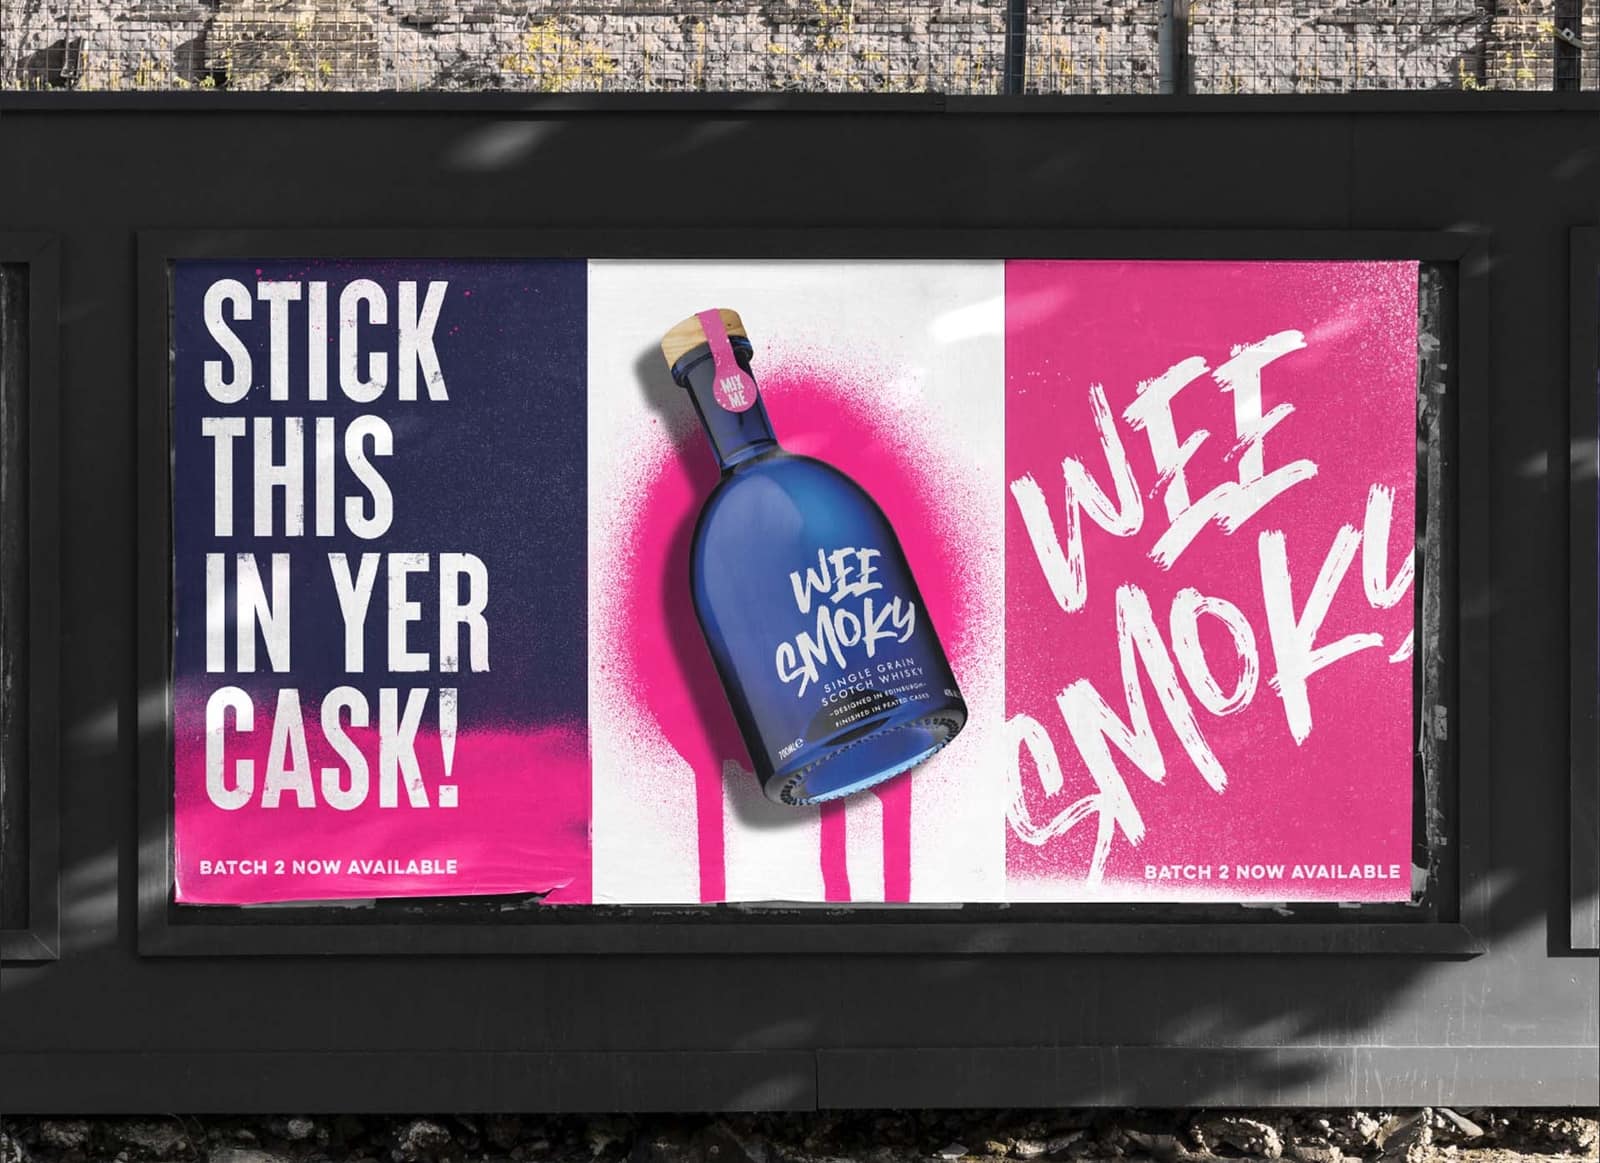 (A billboard ad for Wee Smoky) Unlike most Scotch, the one thing you won't see in a Wee Smoky ad is a glass of whisky